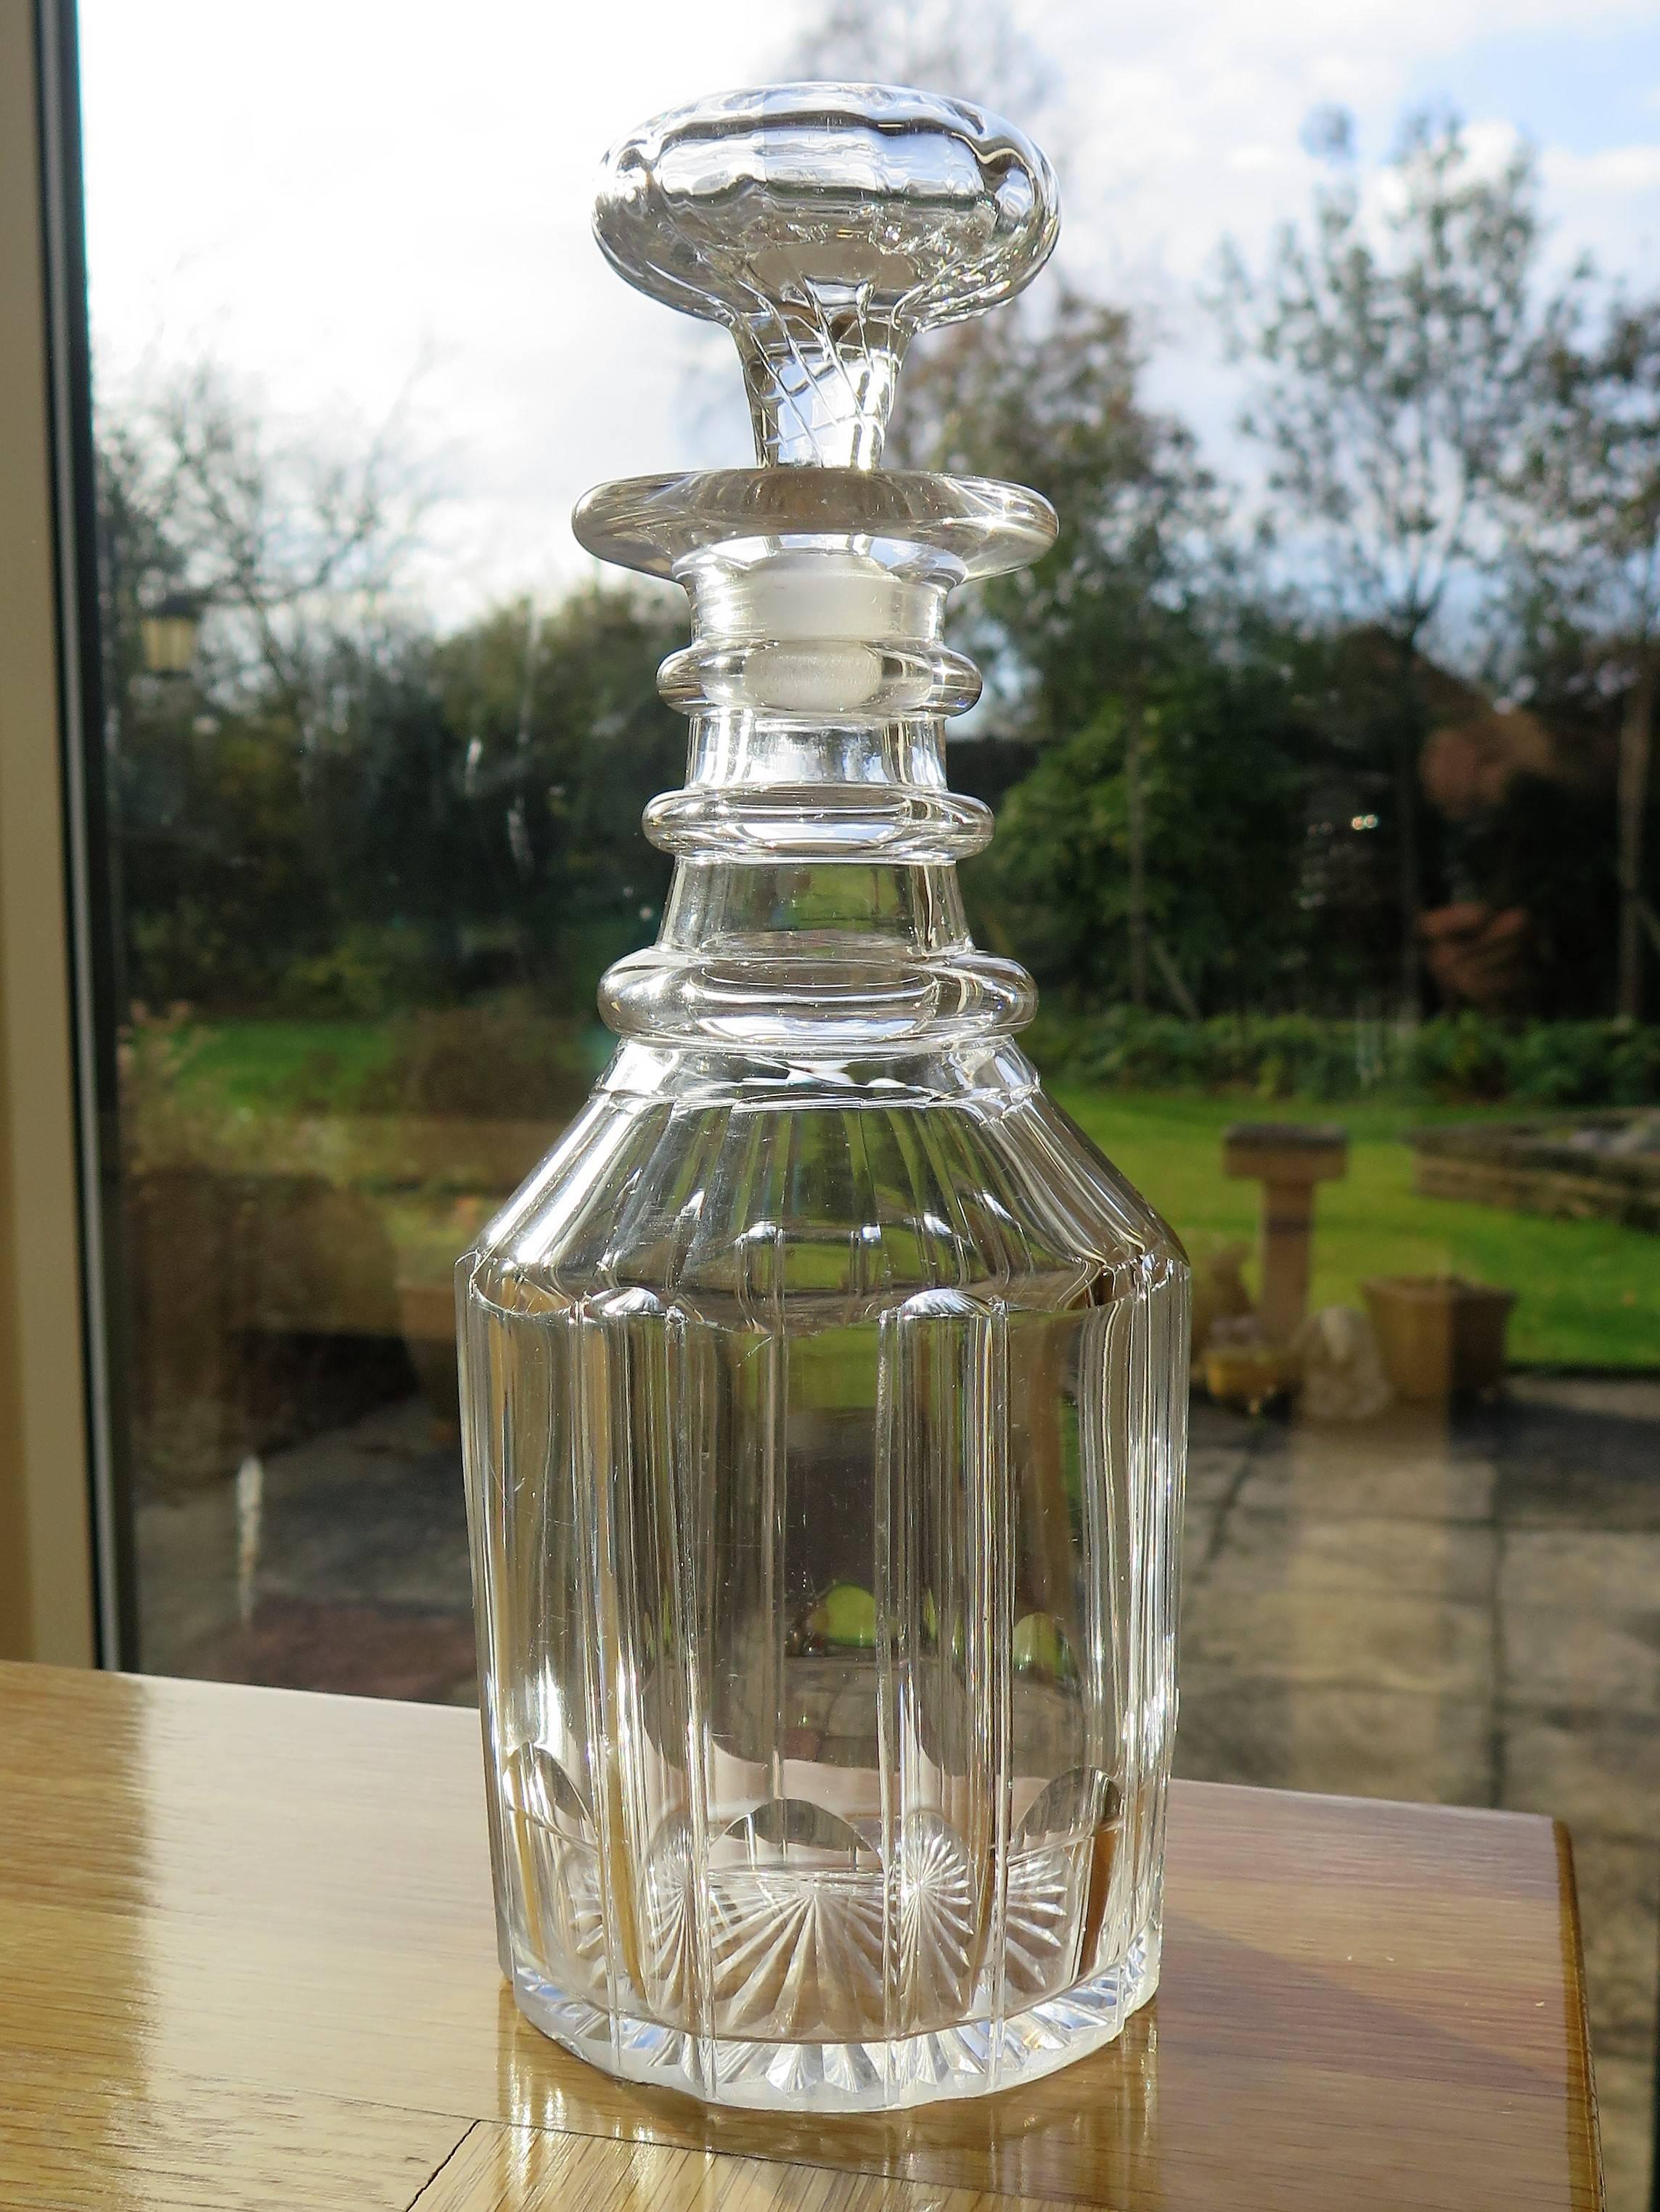 This is a good Anglo-Irish cut-glass or crystal decanter made early in the 19th century, circa 1815, during the English Regency, late Georgian period.

The decanter is nominally straight sided and is beautifully cut in eight broad vertical columns